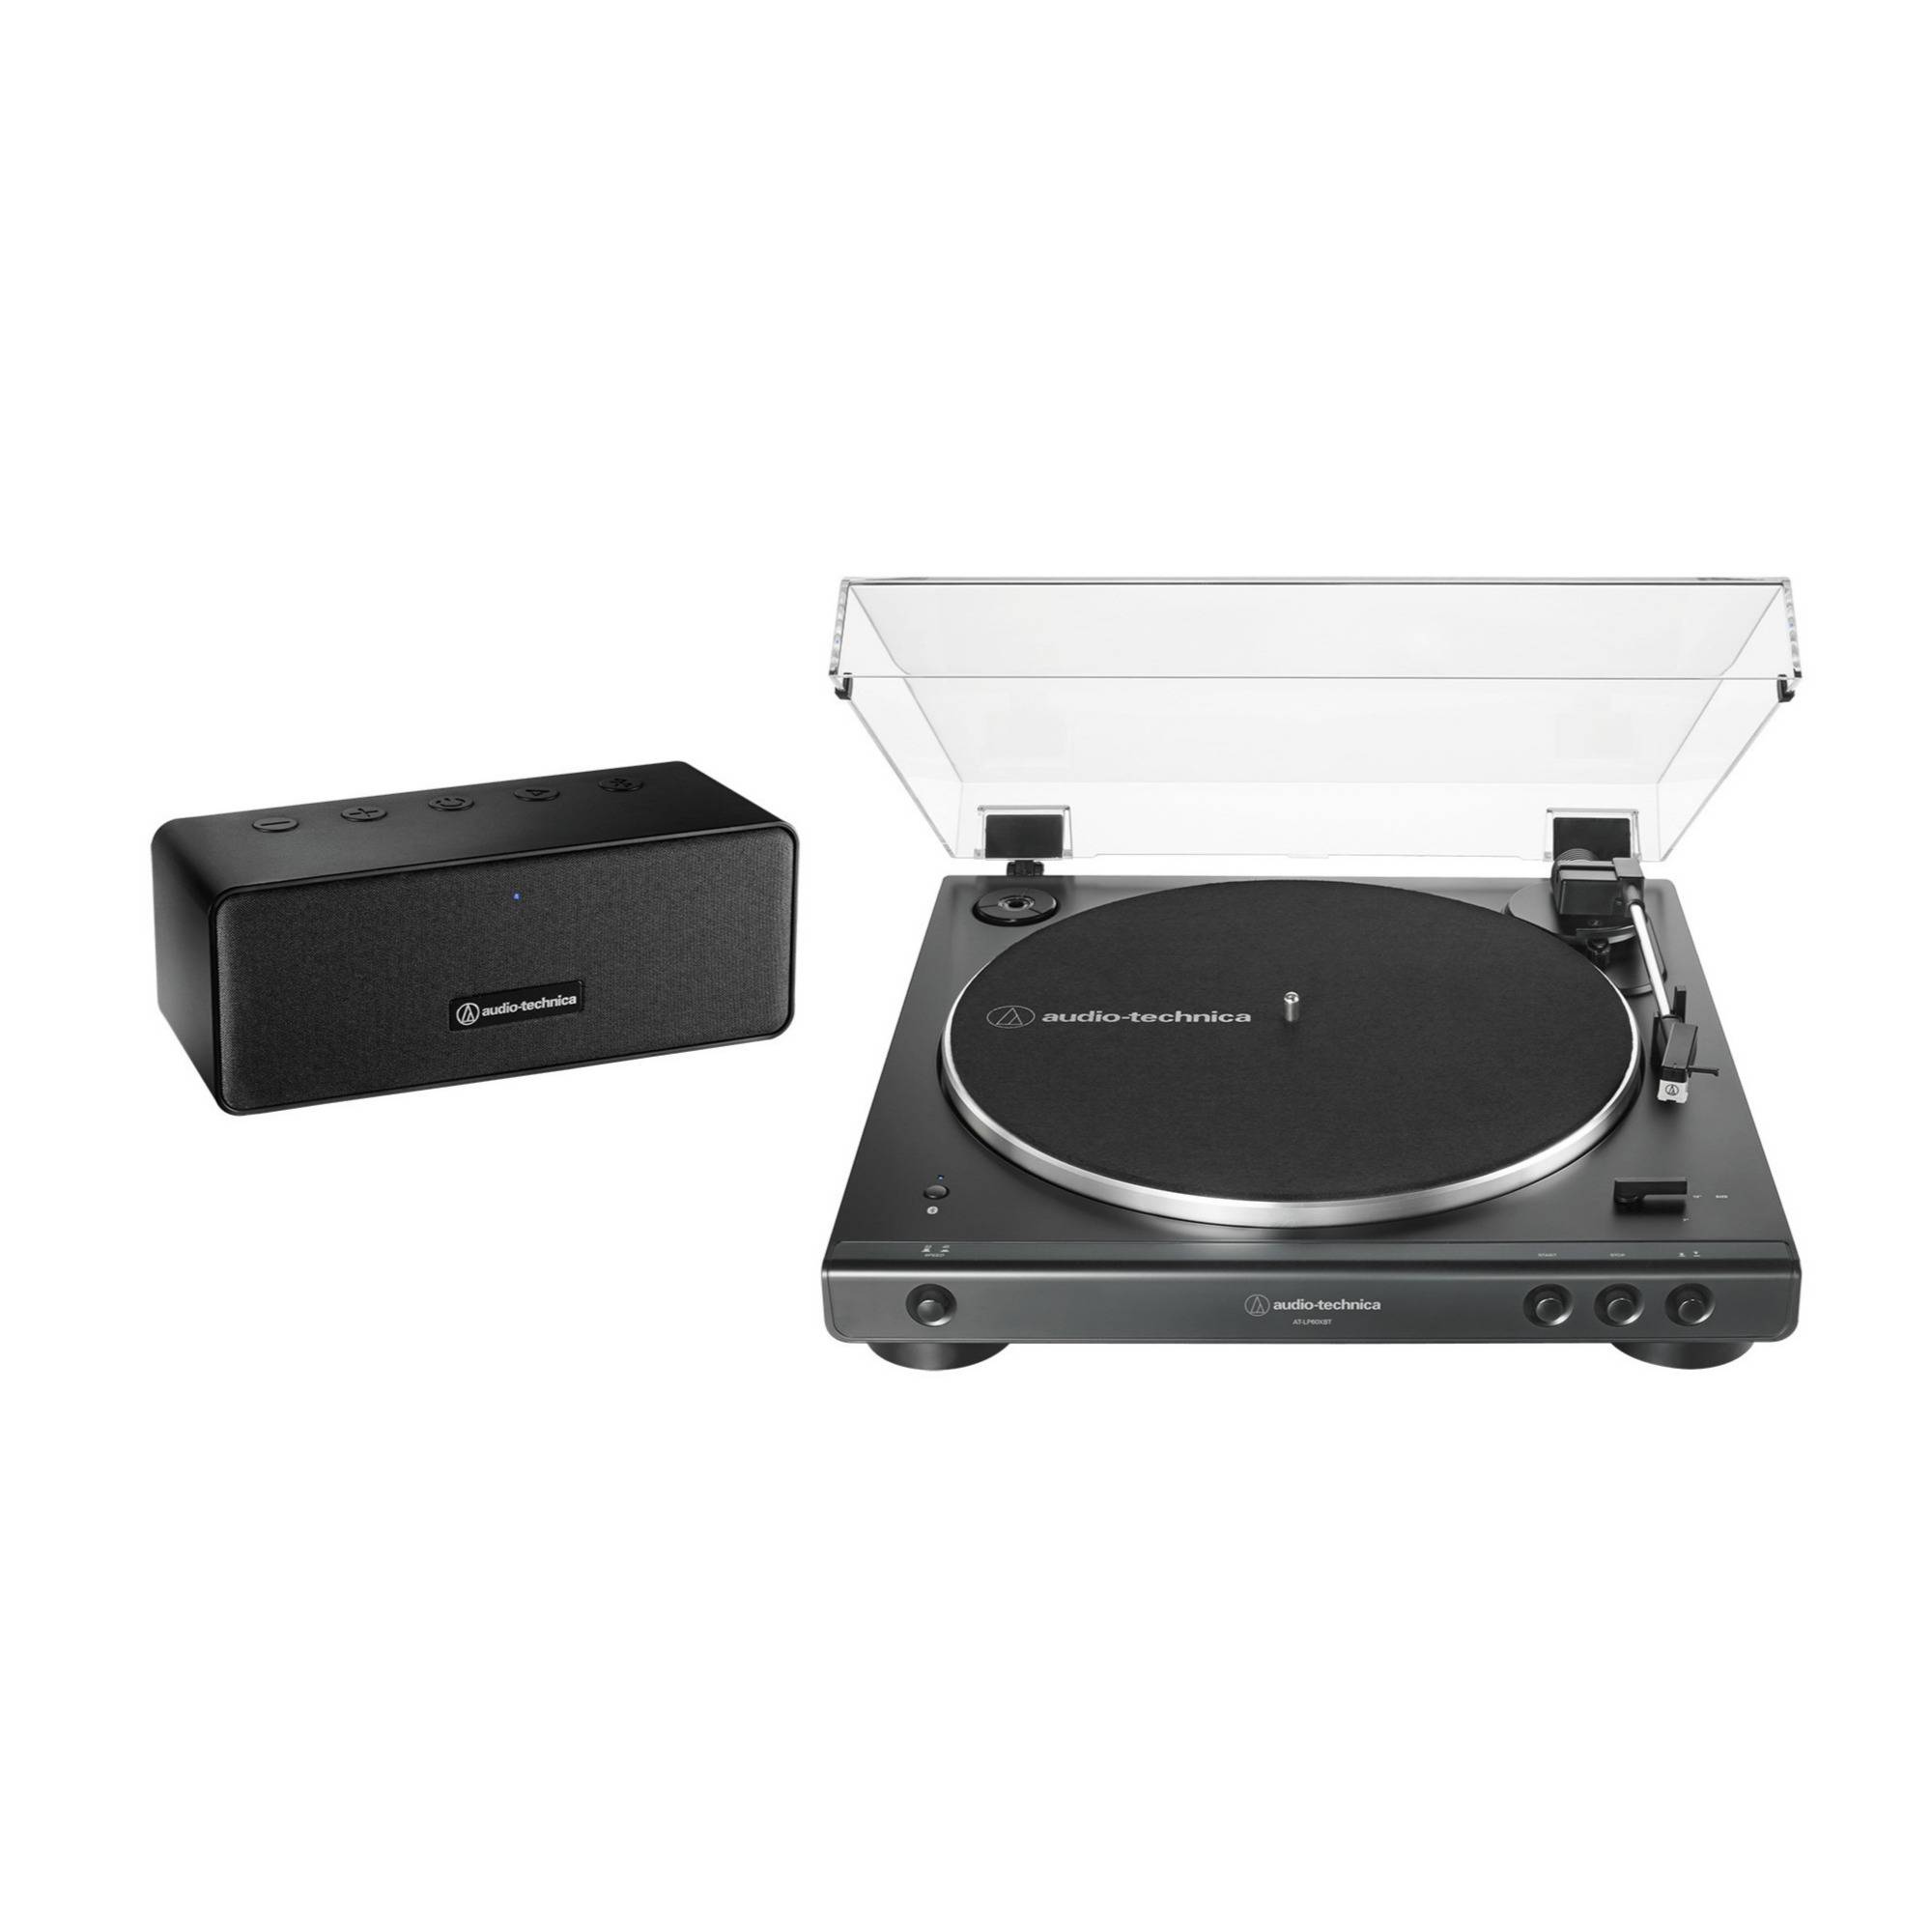 Audio-Technica AT-LP60XSPBT Fully Automatic Two-Speed Turntable and Bluetooth Speaker Bundle (Black)